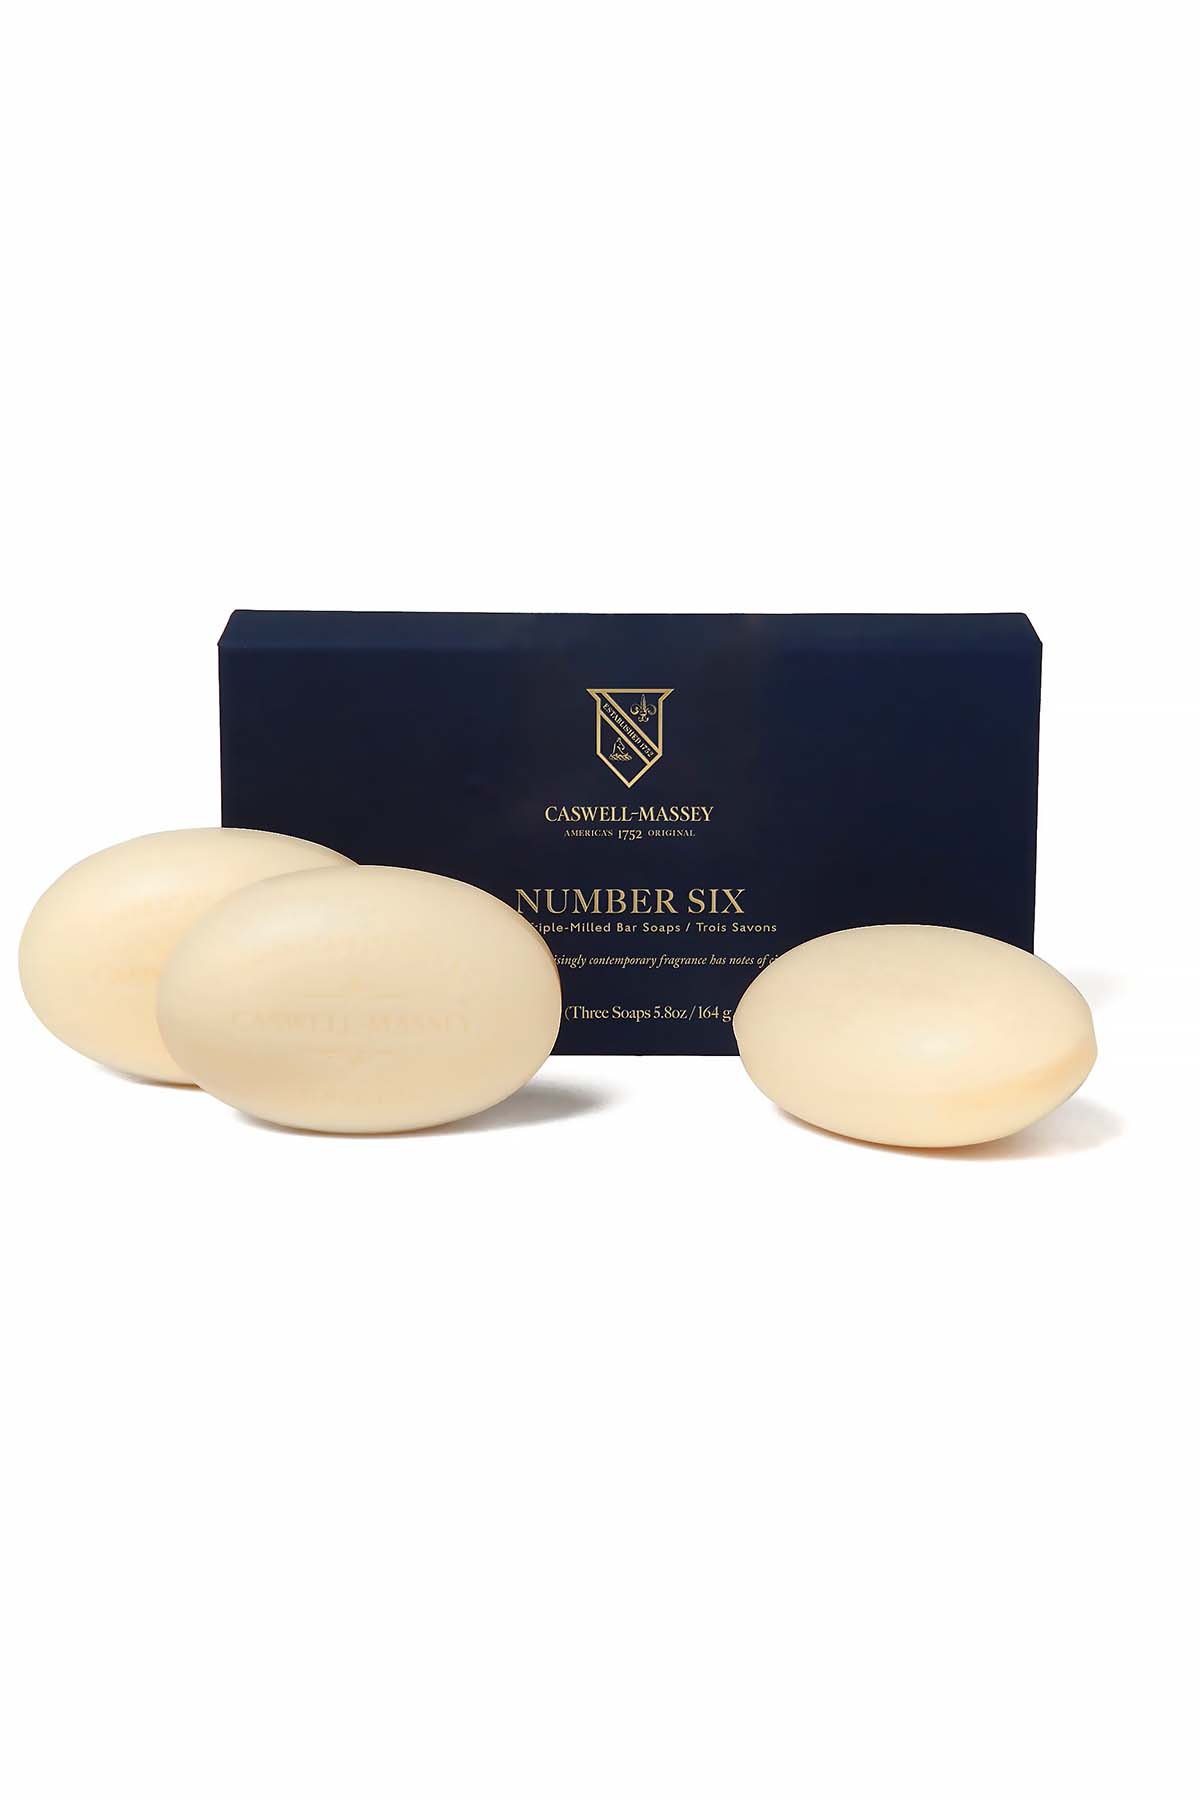 Caswell-Massey Heritage Number Six 3 Bar Soap Set